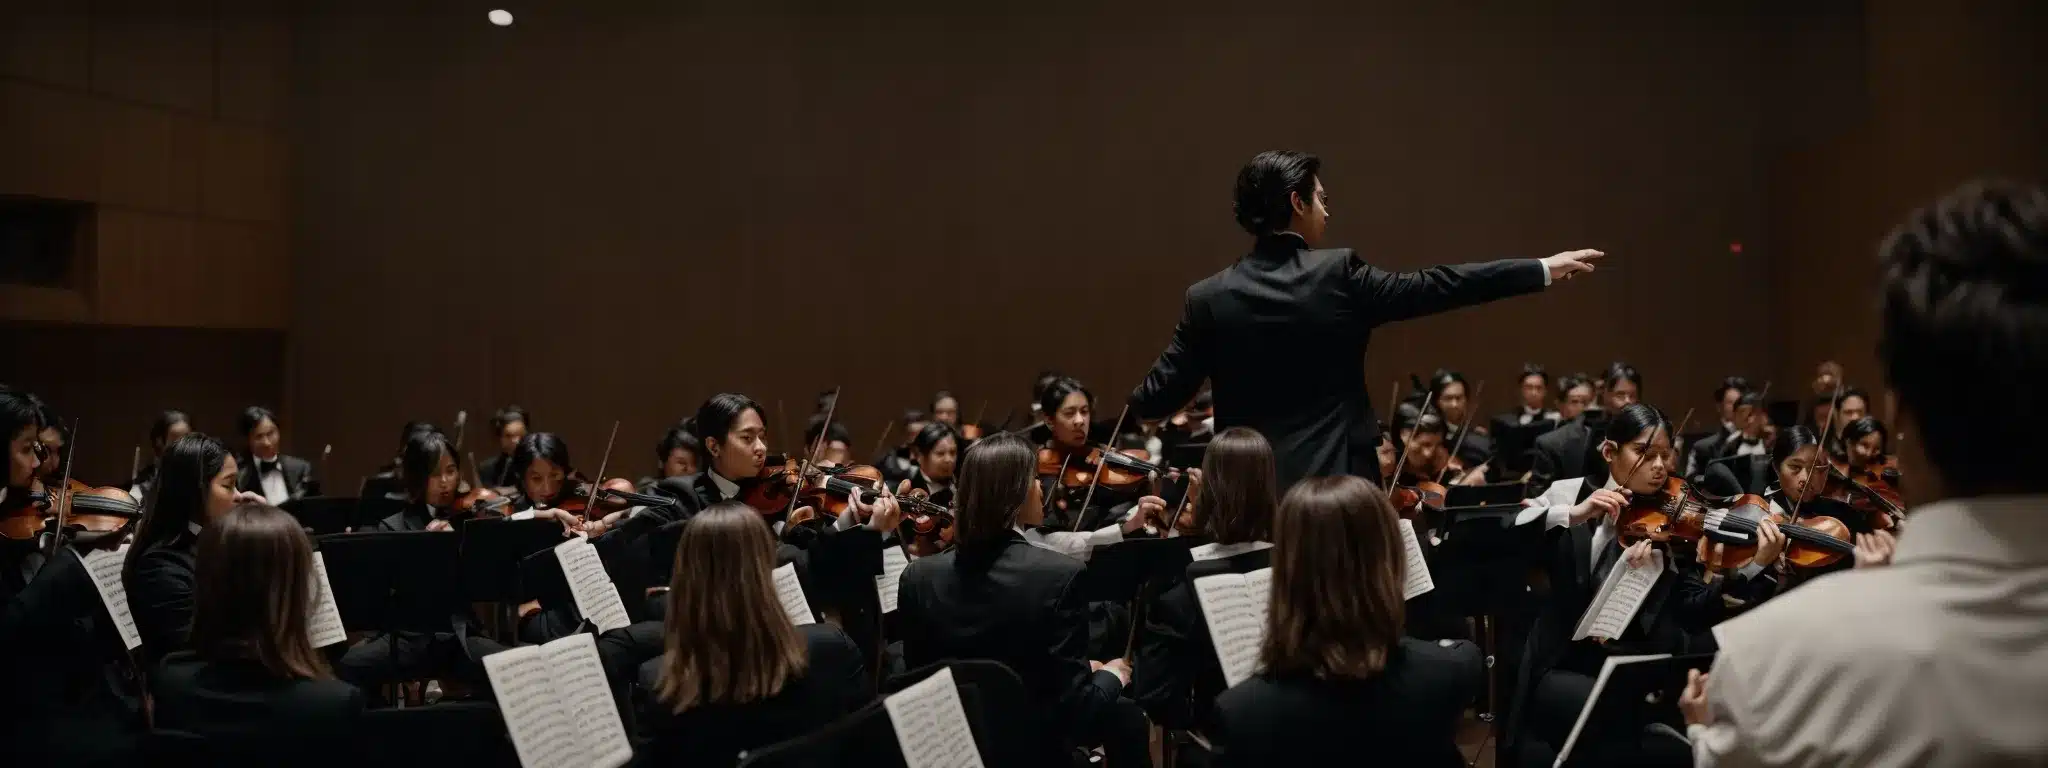 A Conductor Leading An Orchestra, Symbolizing Strategic Leadership In Marketing Engagement.